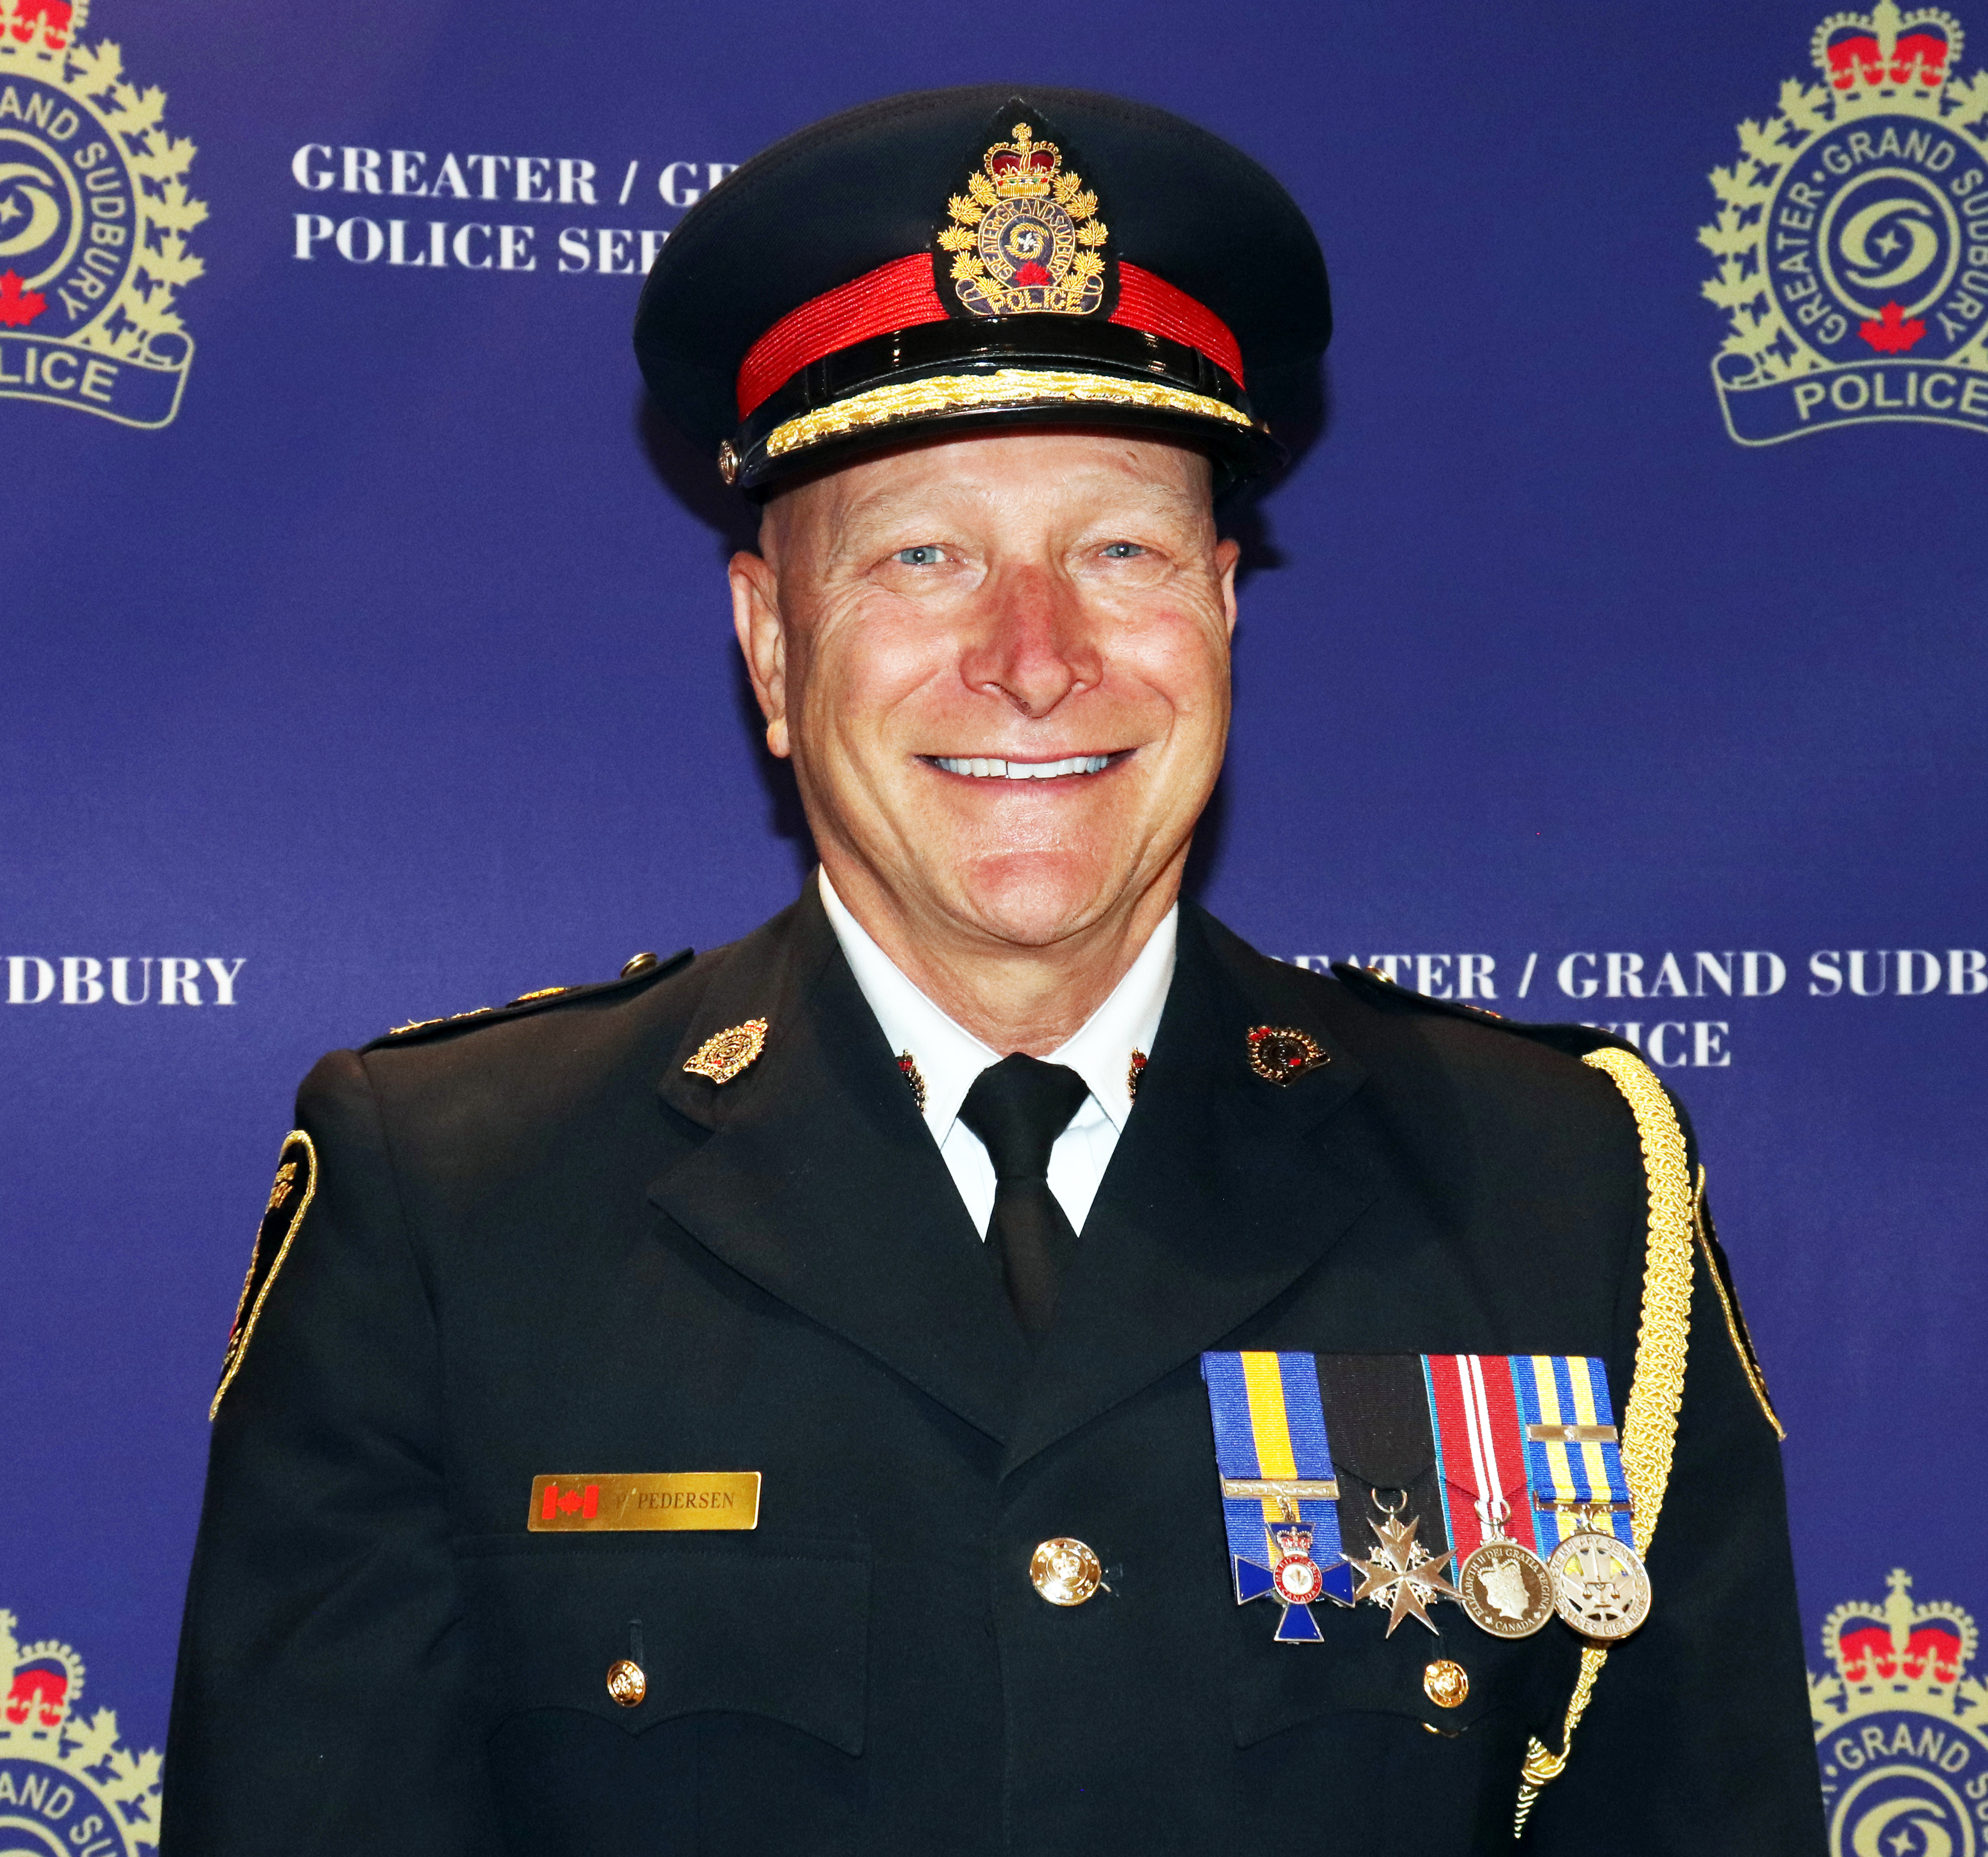 Chief of Police smiling wearing uniform